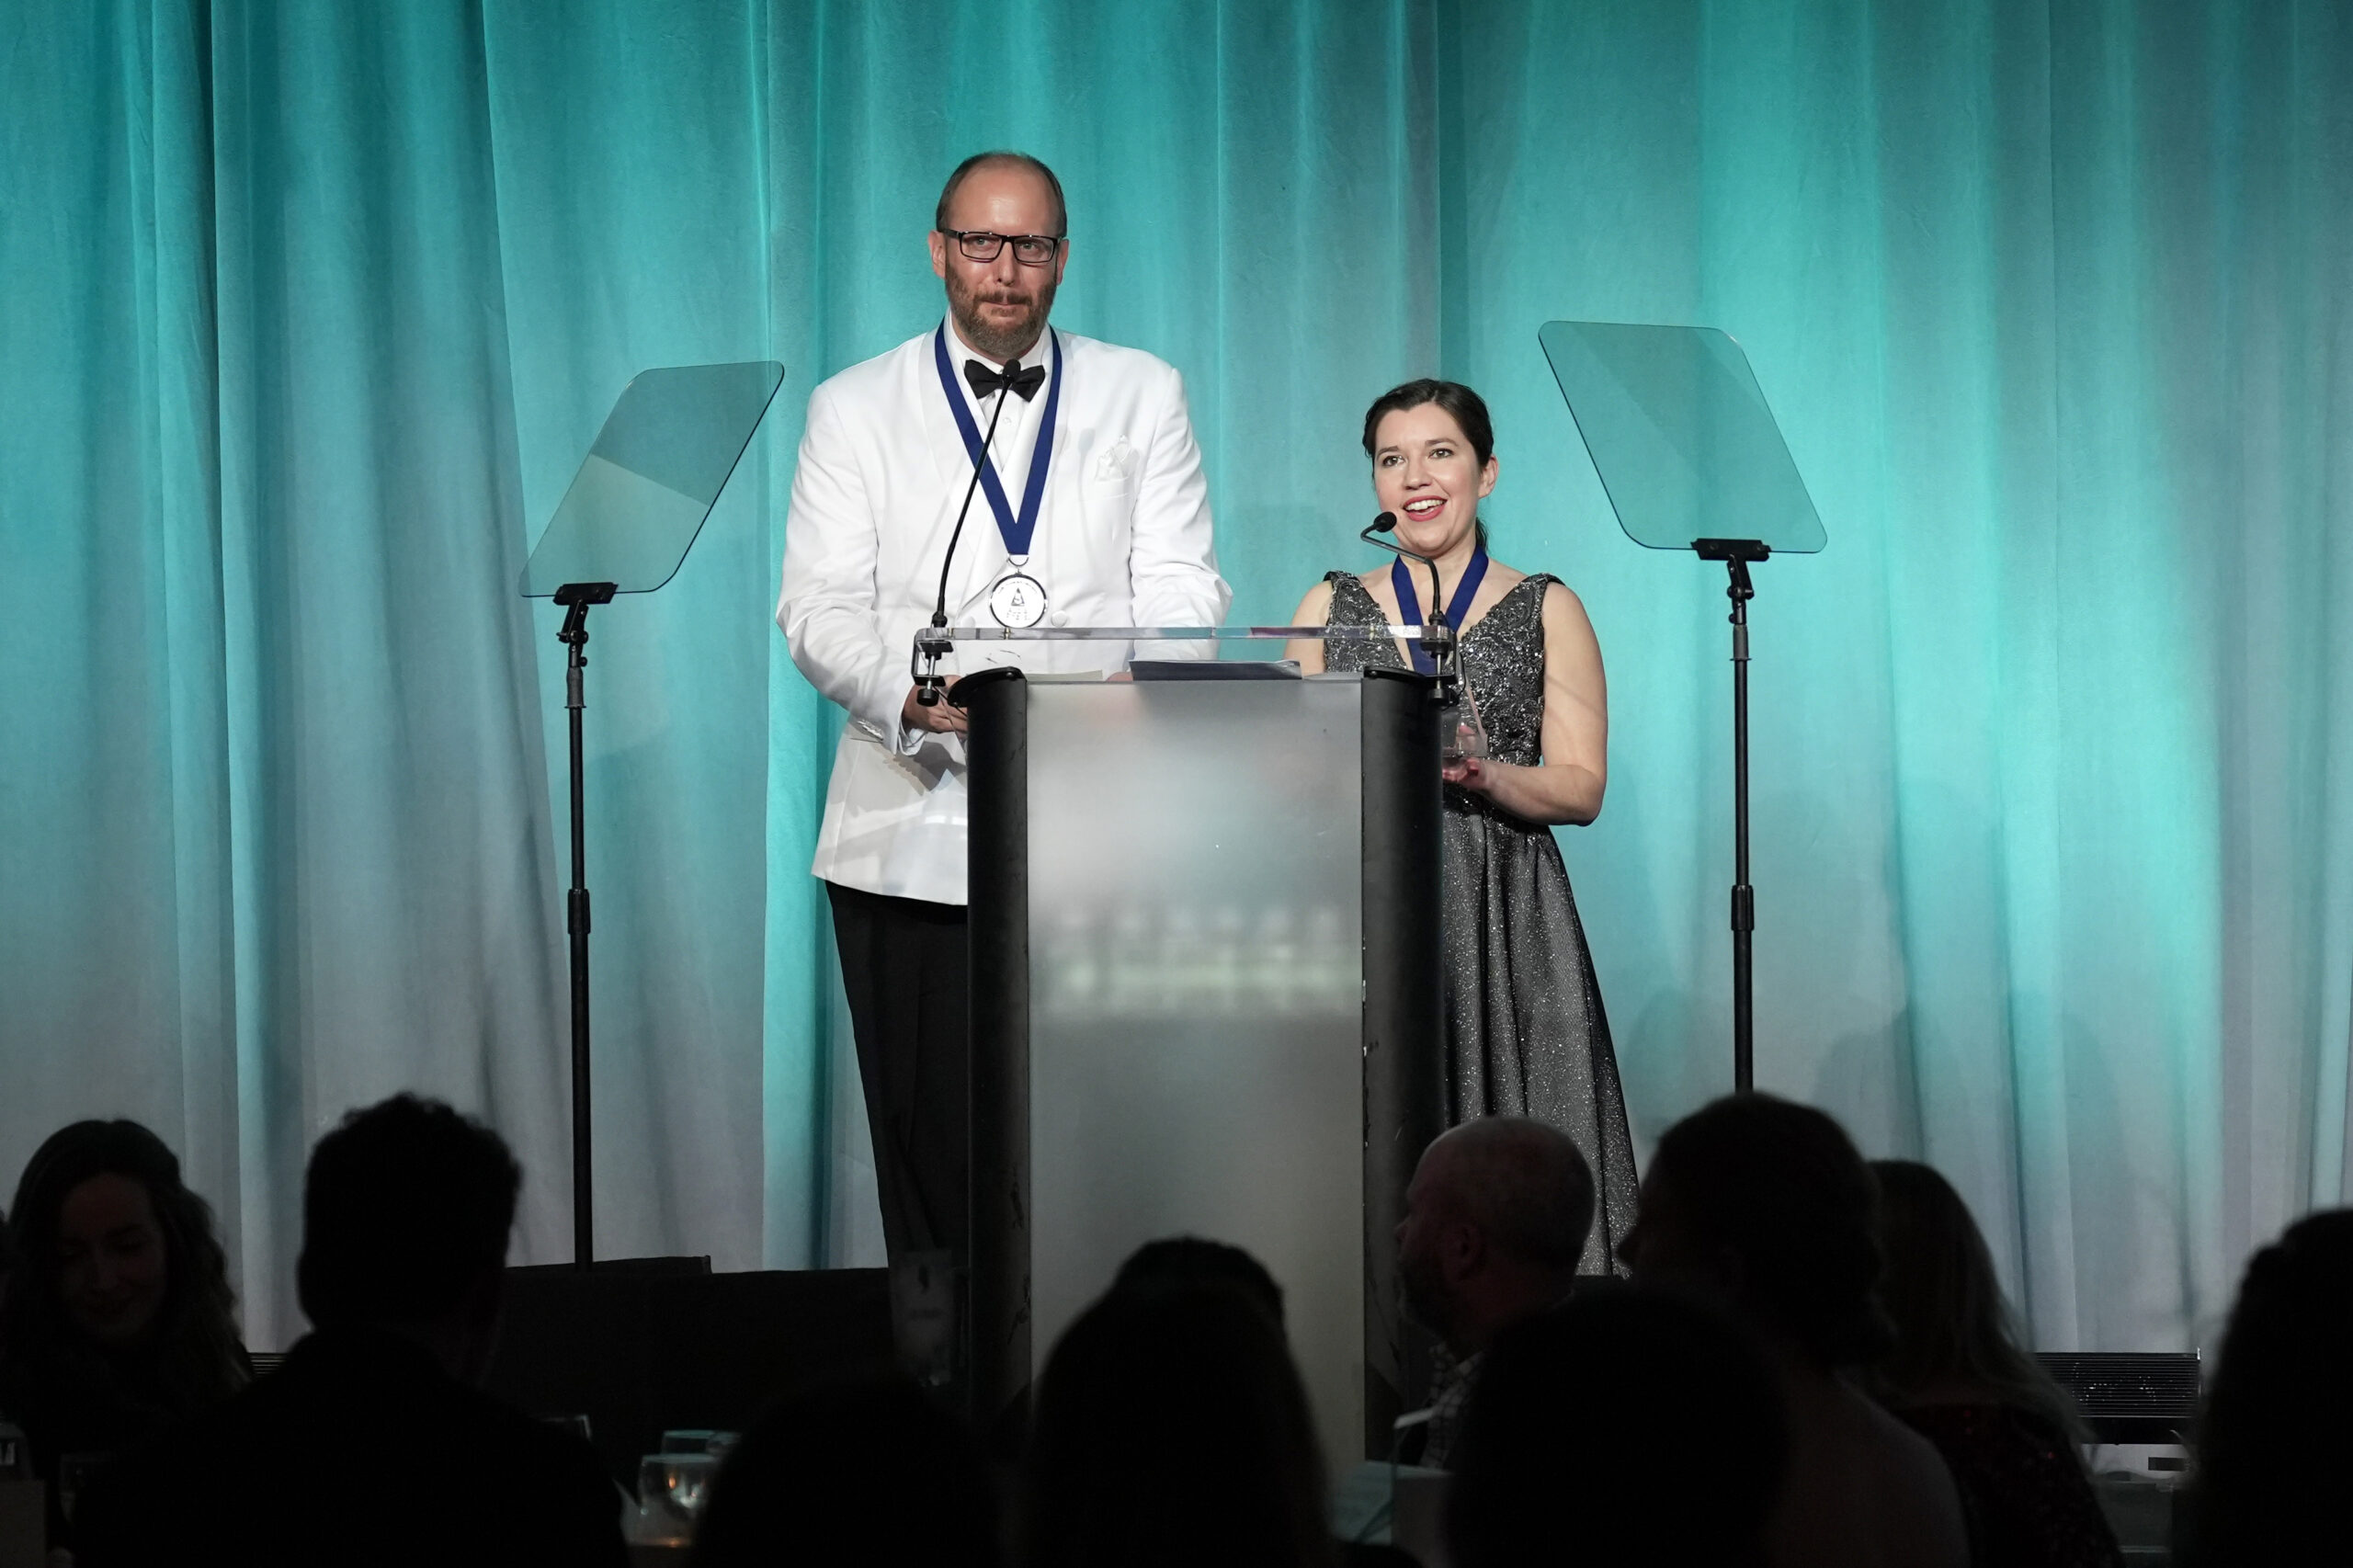 NEW YORK, NEW YORK - MARCH 28: Landon Beach and Hope Newhouse speak onstage during the Audio Publishers Association's 2023 Audie Awards at Pier 60, Chelsea Piers on March 28, 2023 in New York City. (Photo by Ilya S. Savenok/Getty Images for Audio Publishers Association)